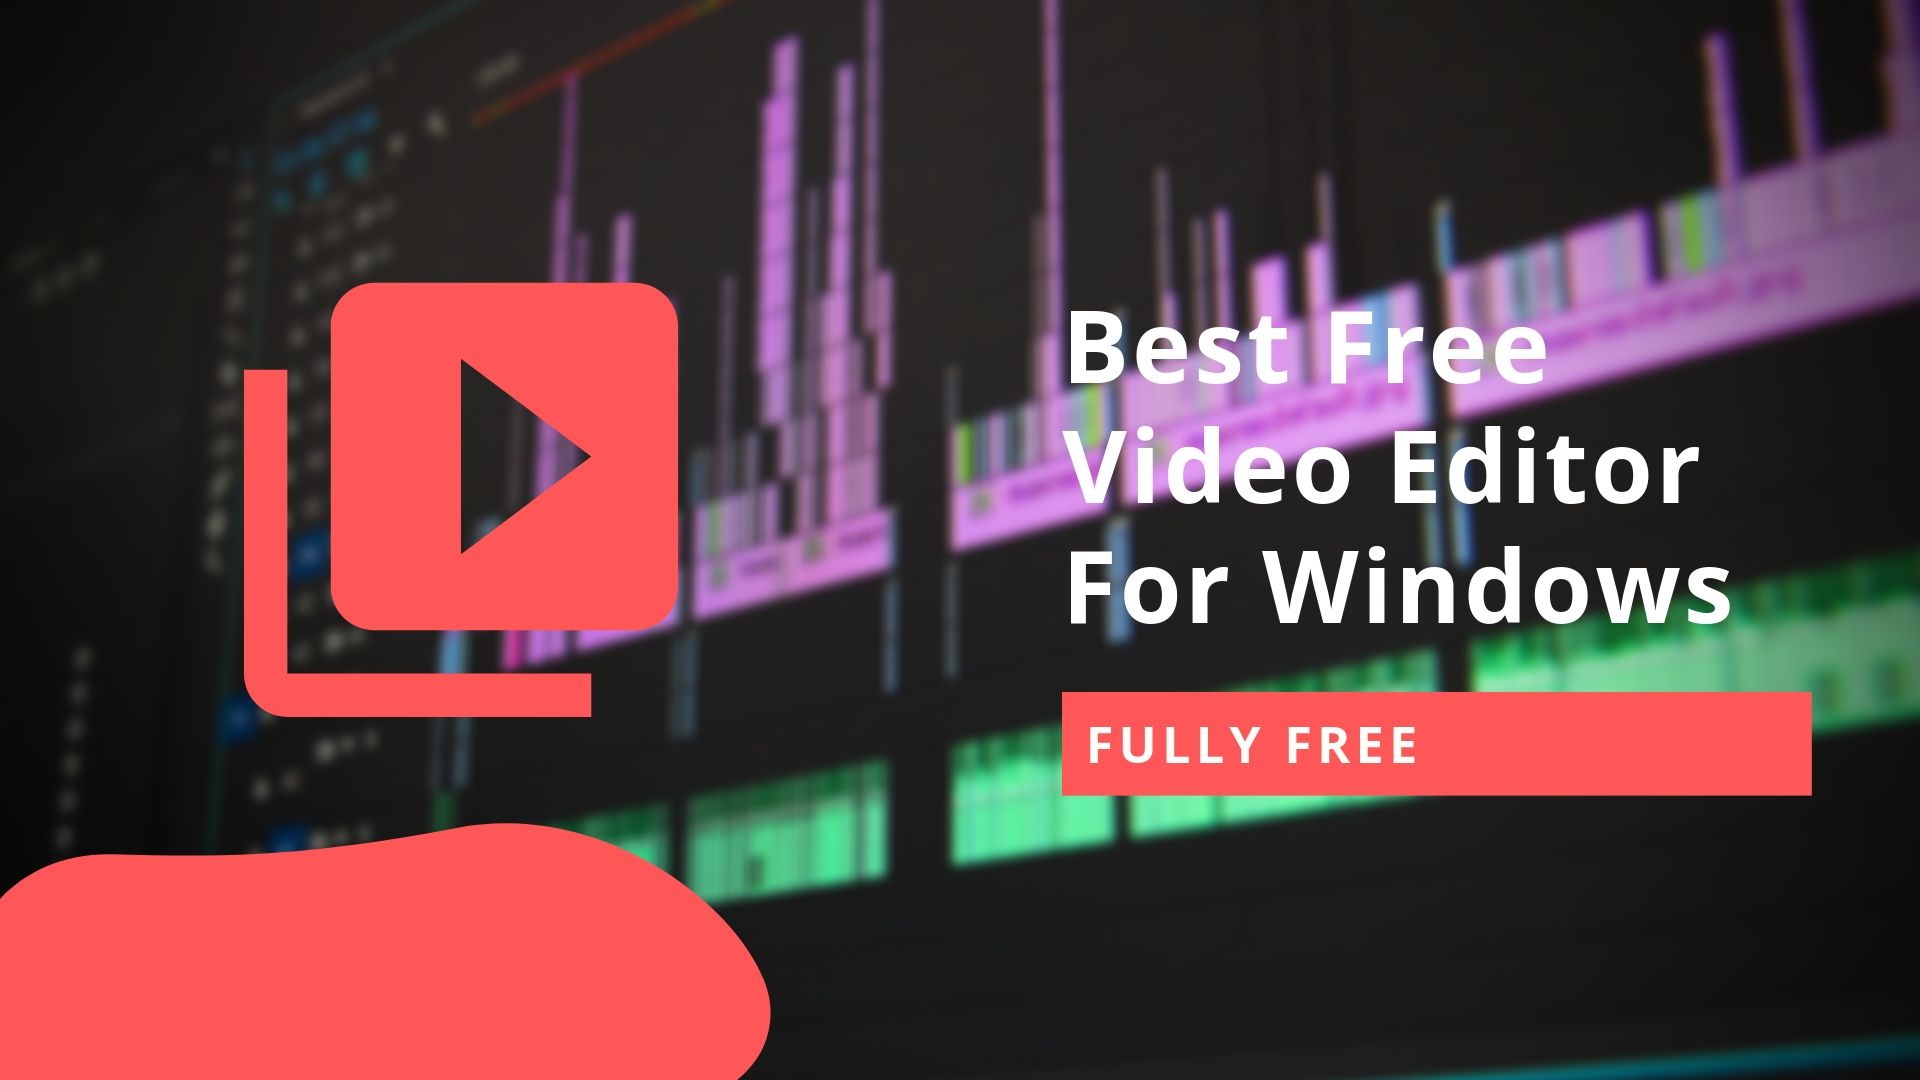 Best Free Video Editor For Windows